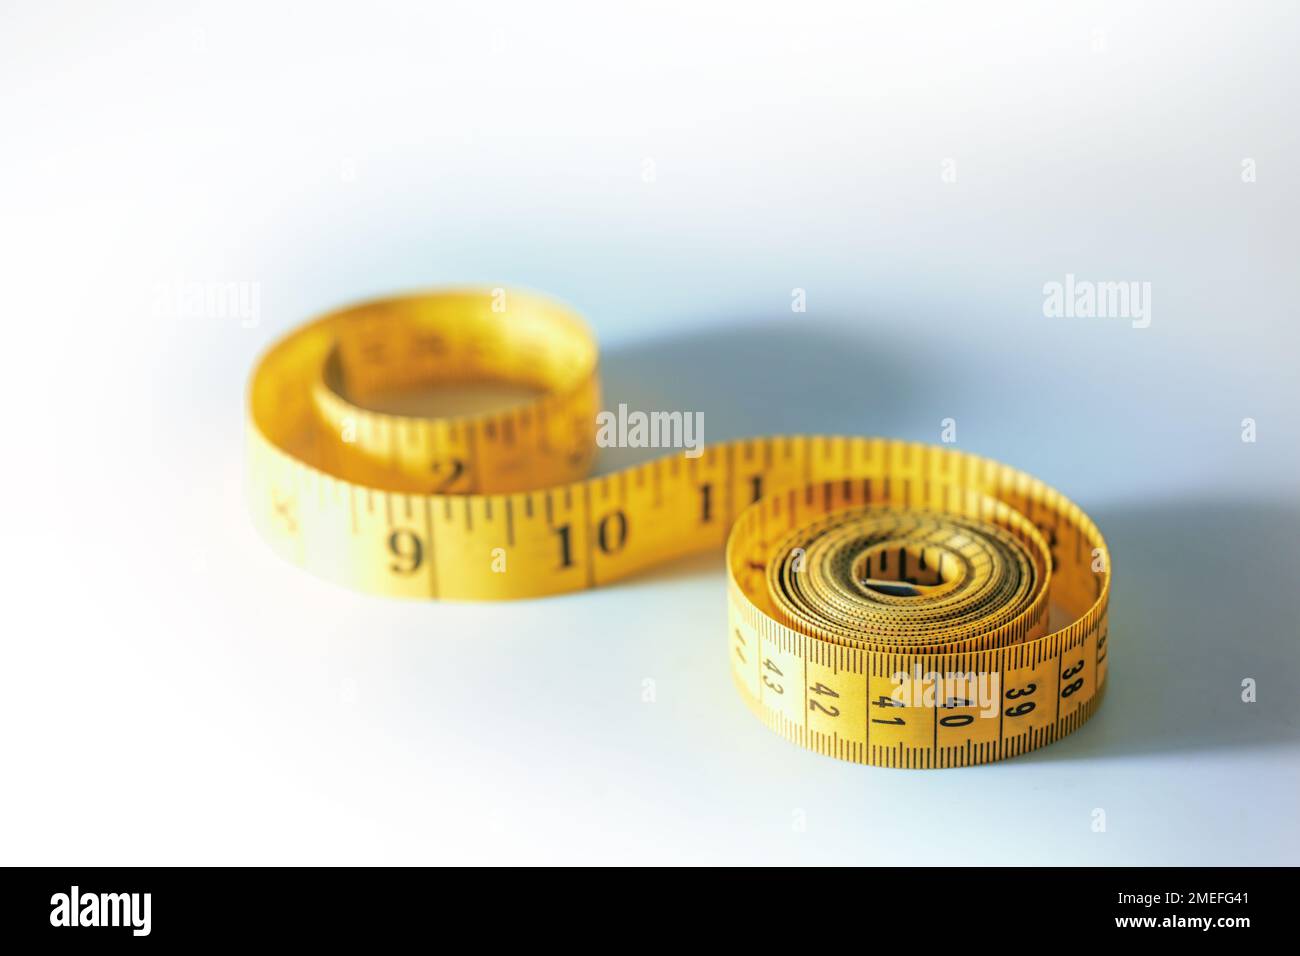 Yellow tape measure rolled up into spirals, sewing tool or symbol for slimming diet, light gray blue background with copy space, selected focus, narro Stock Photo